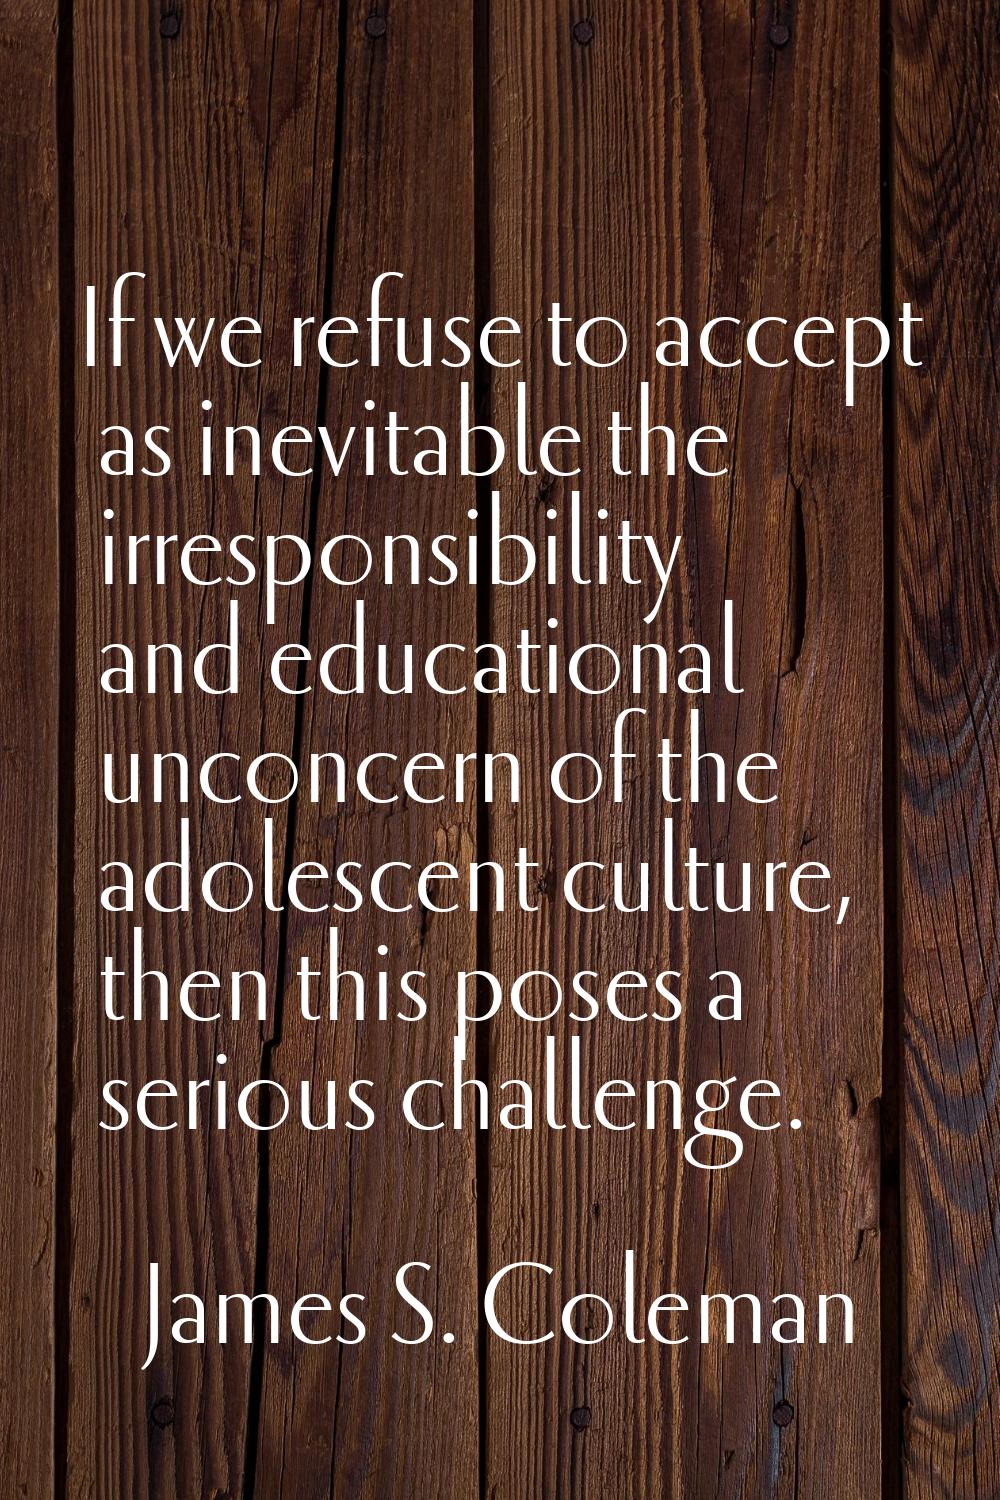 If we refuse to accept as inevitable the irresponsibility and educational unconcern of the adolesce